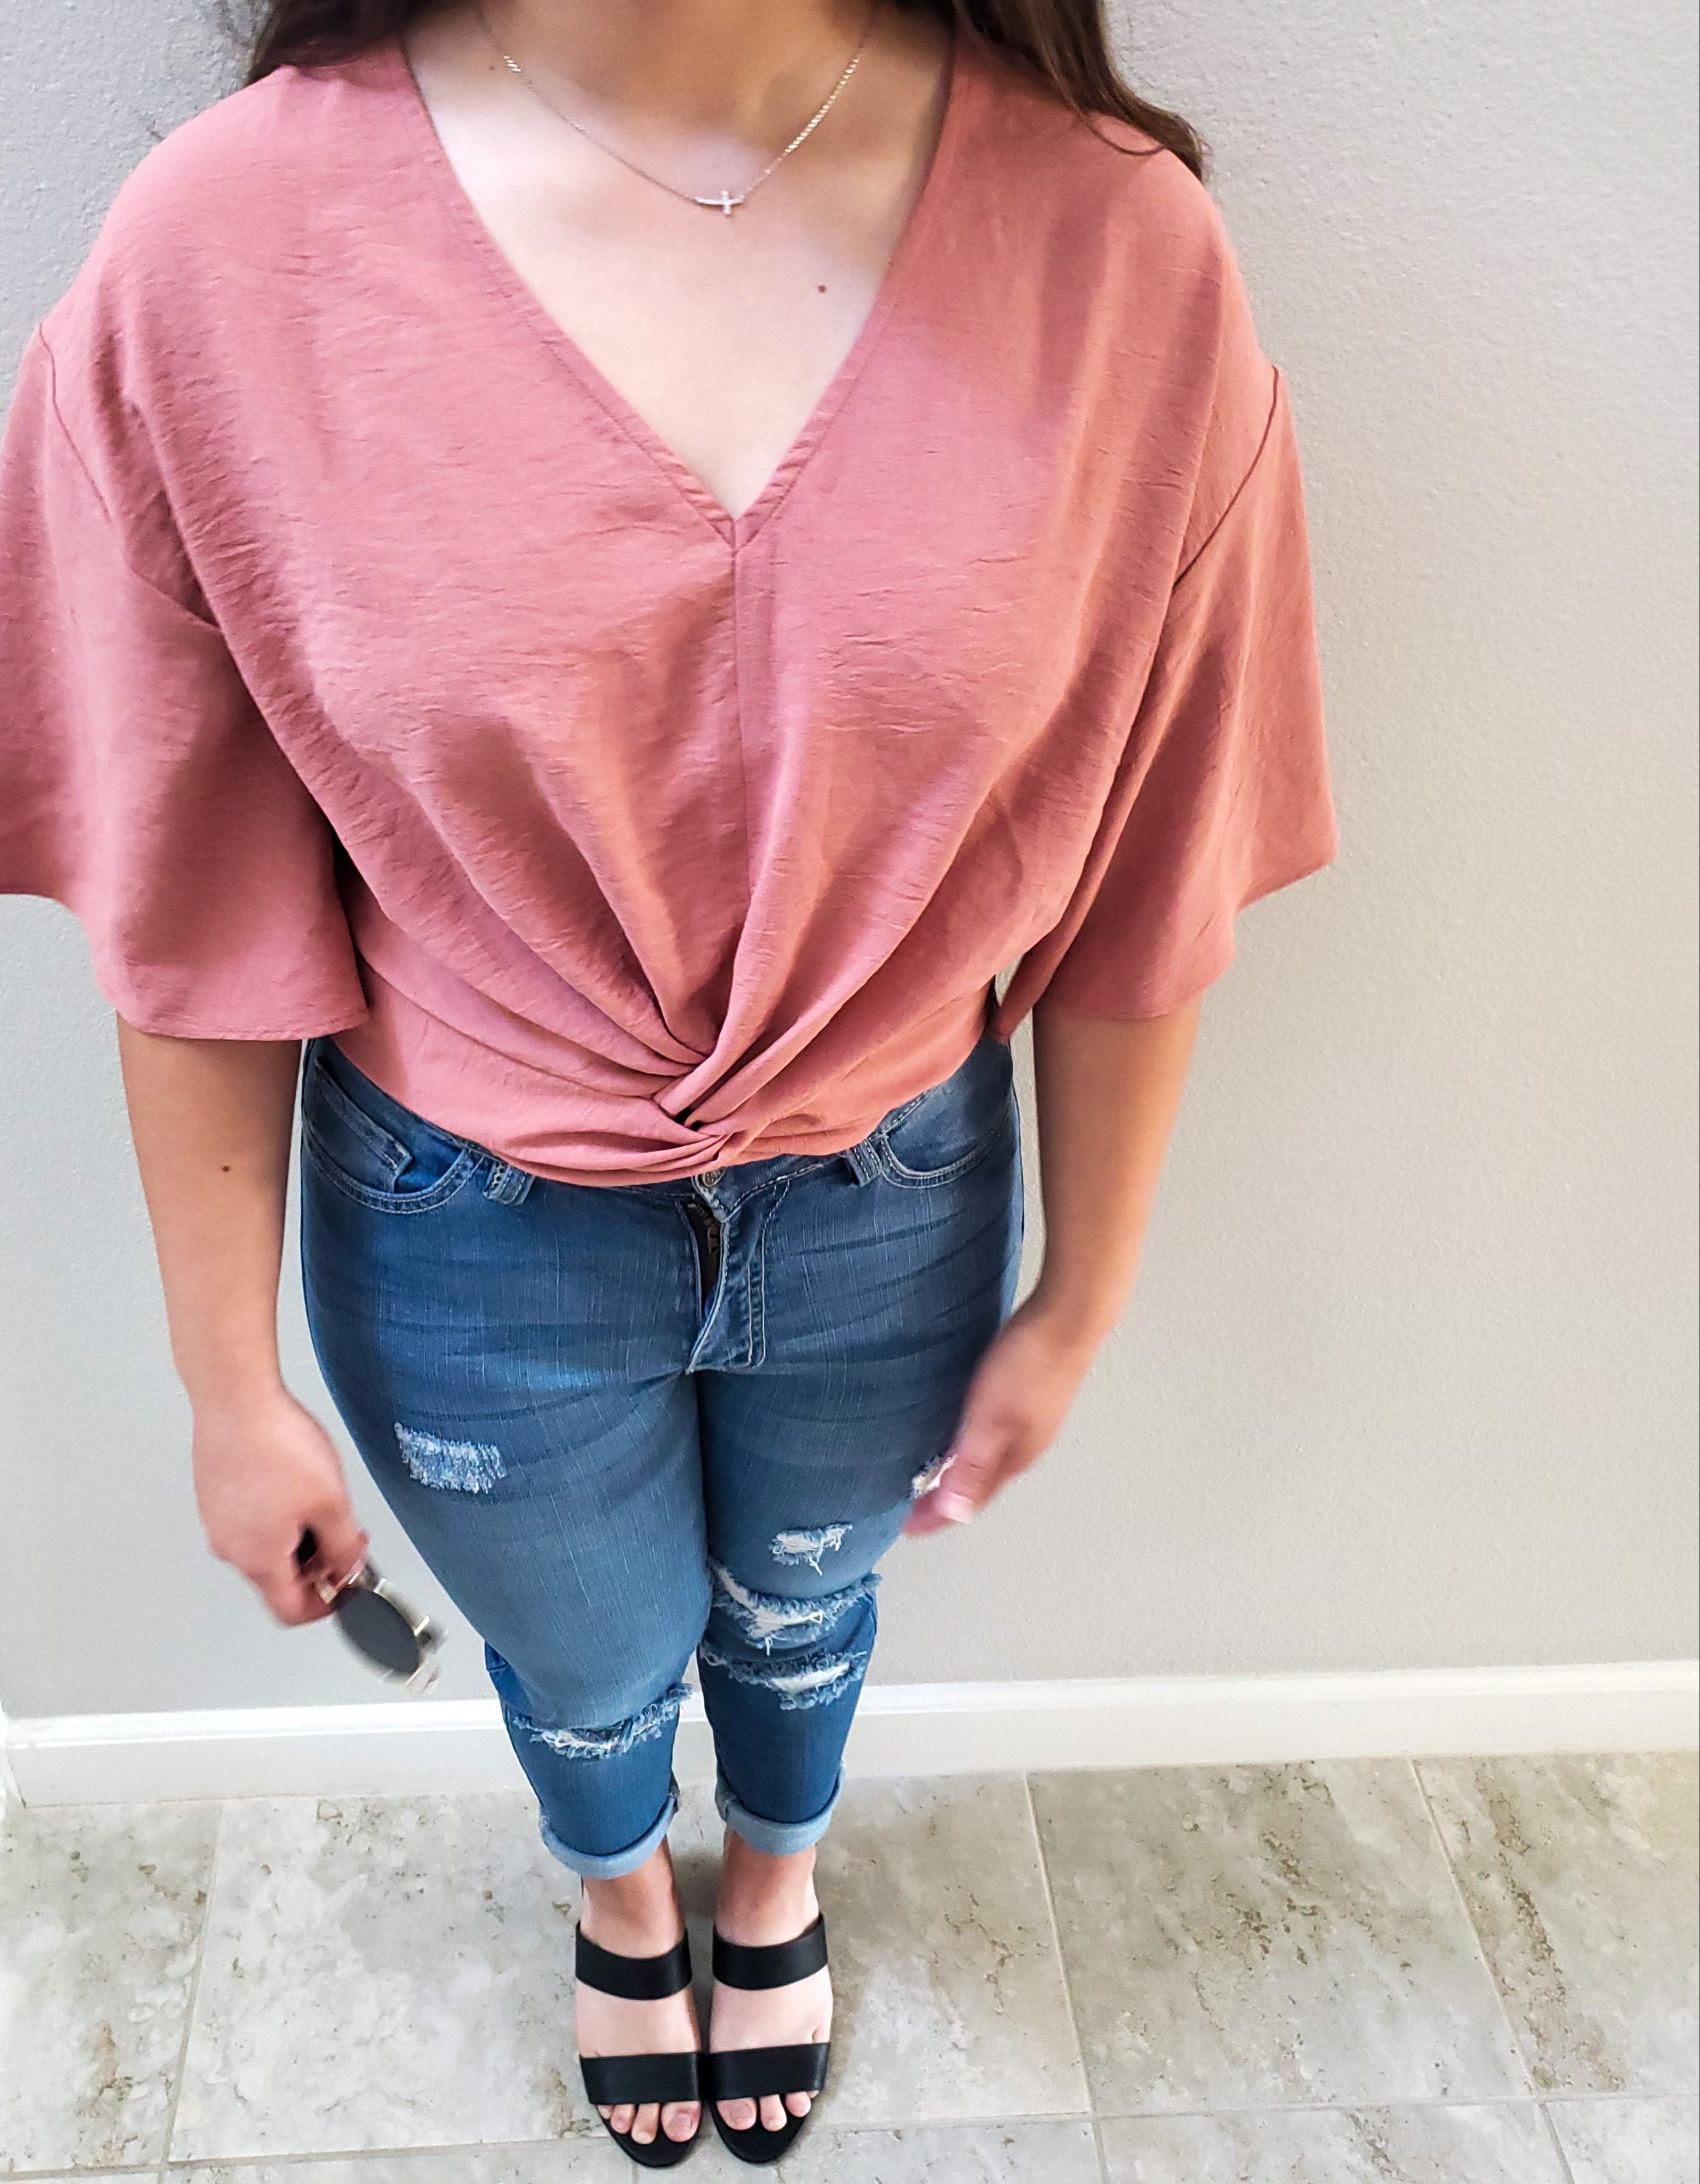 Rose All Day Top